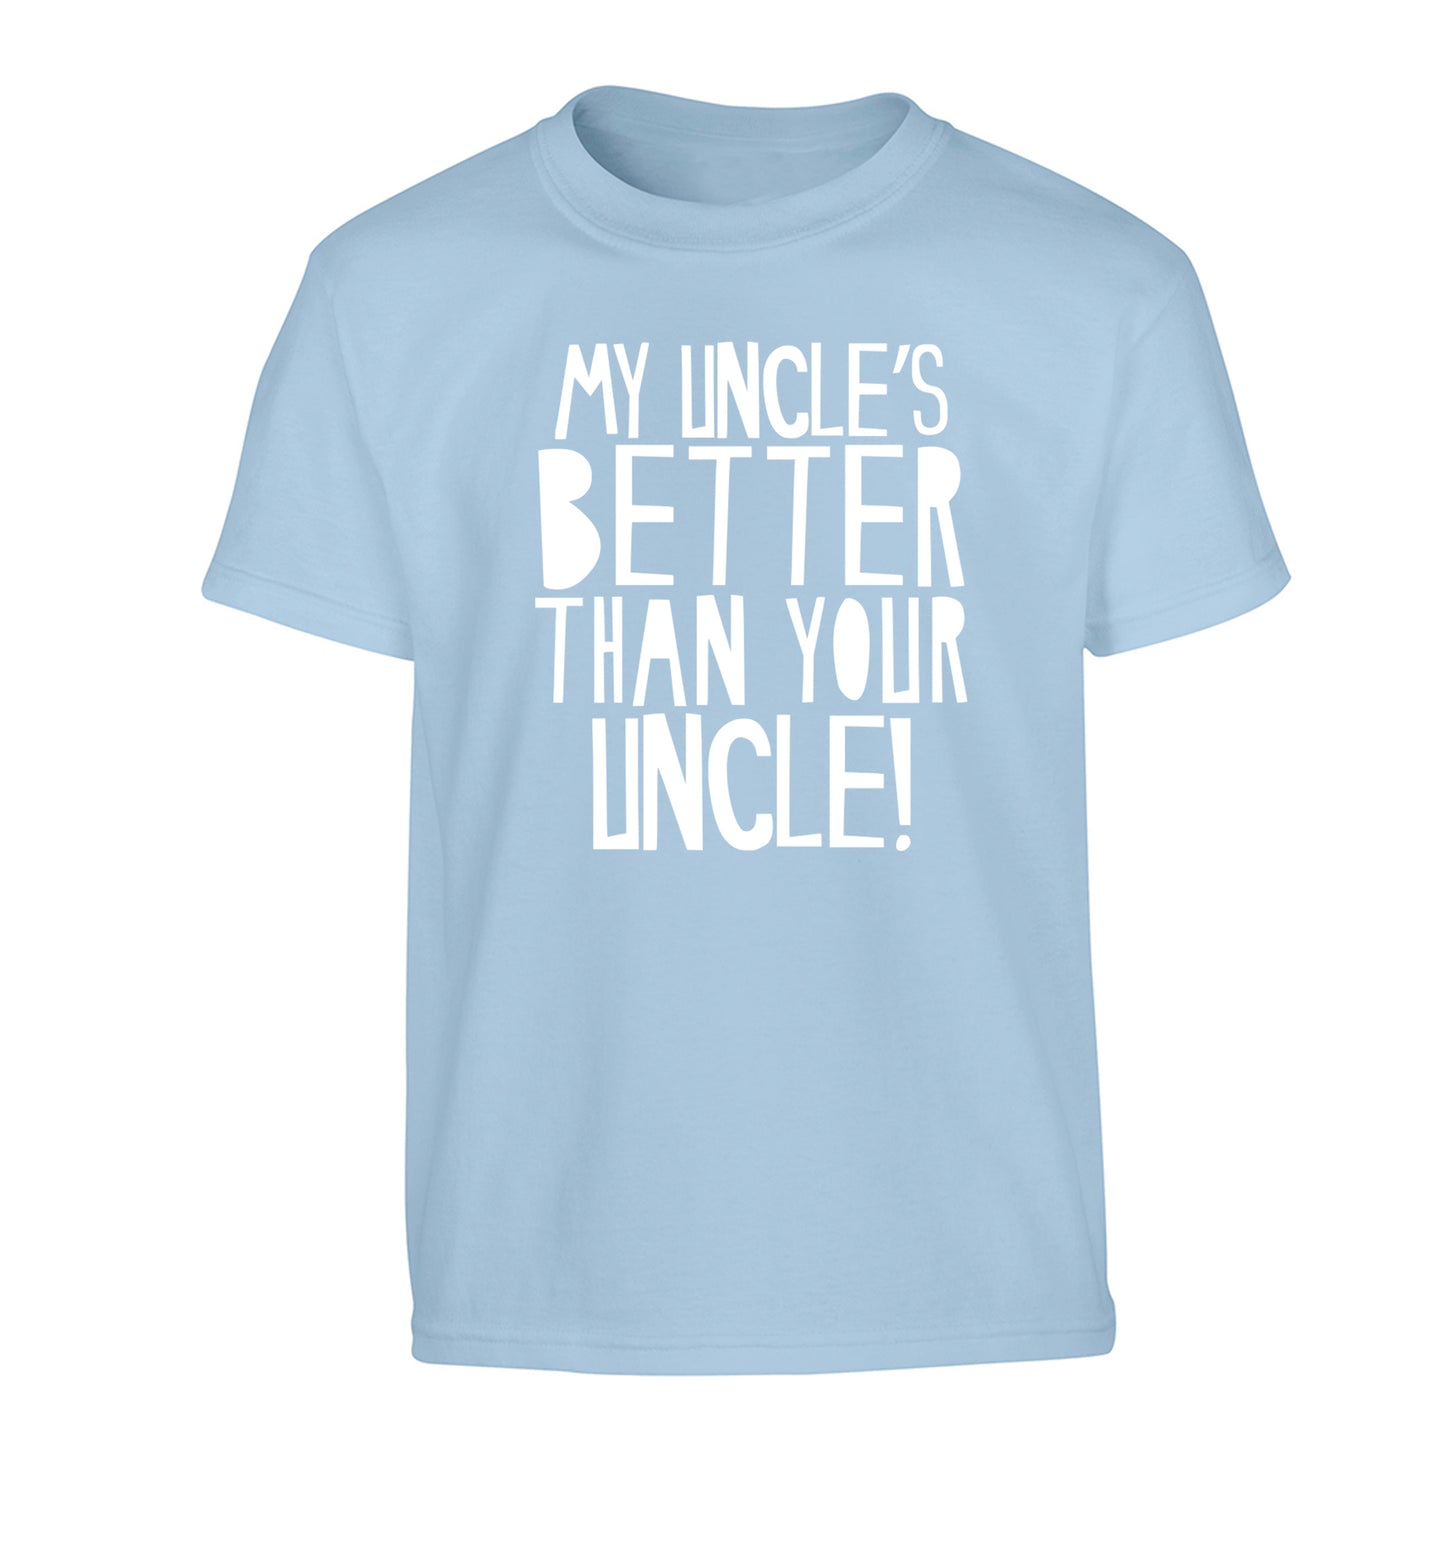 My uncles better than your uncle Children's light blue Tshirt 12-13 Years